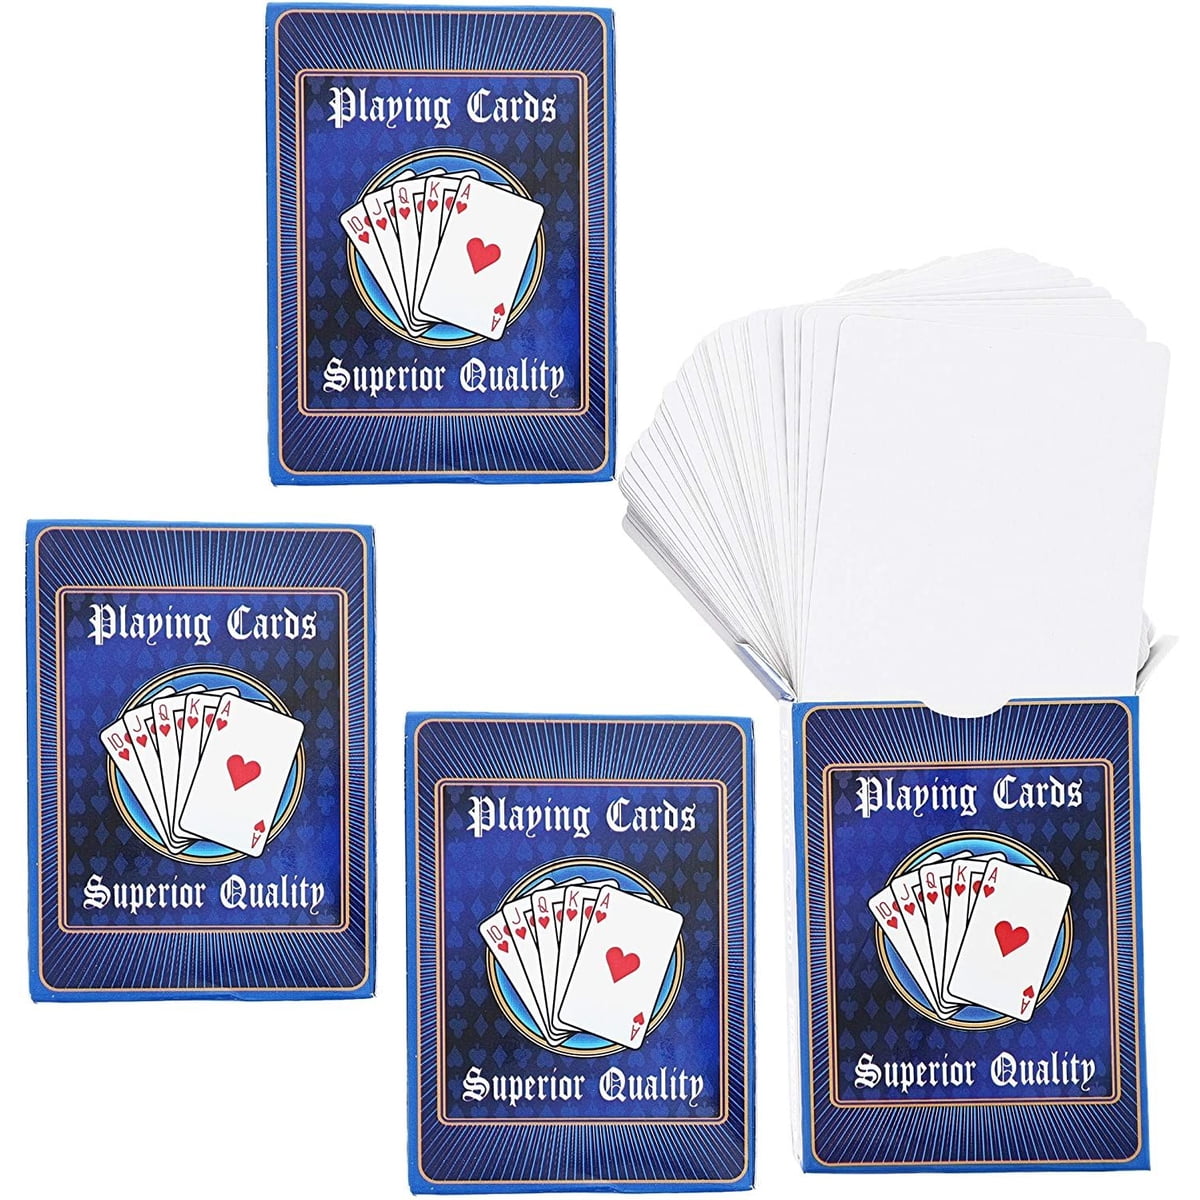 Message Card LotFancy Blank Playing Cards Game Cards Matte Finish Poker Size Vocabulary Word Card 180PCS White Blank Index Flash Cards DIY Gift Card Study Learning Cards 